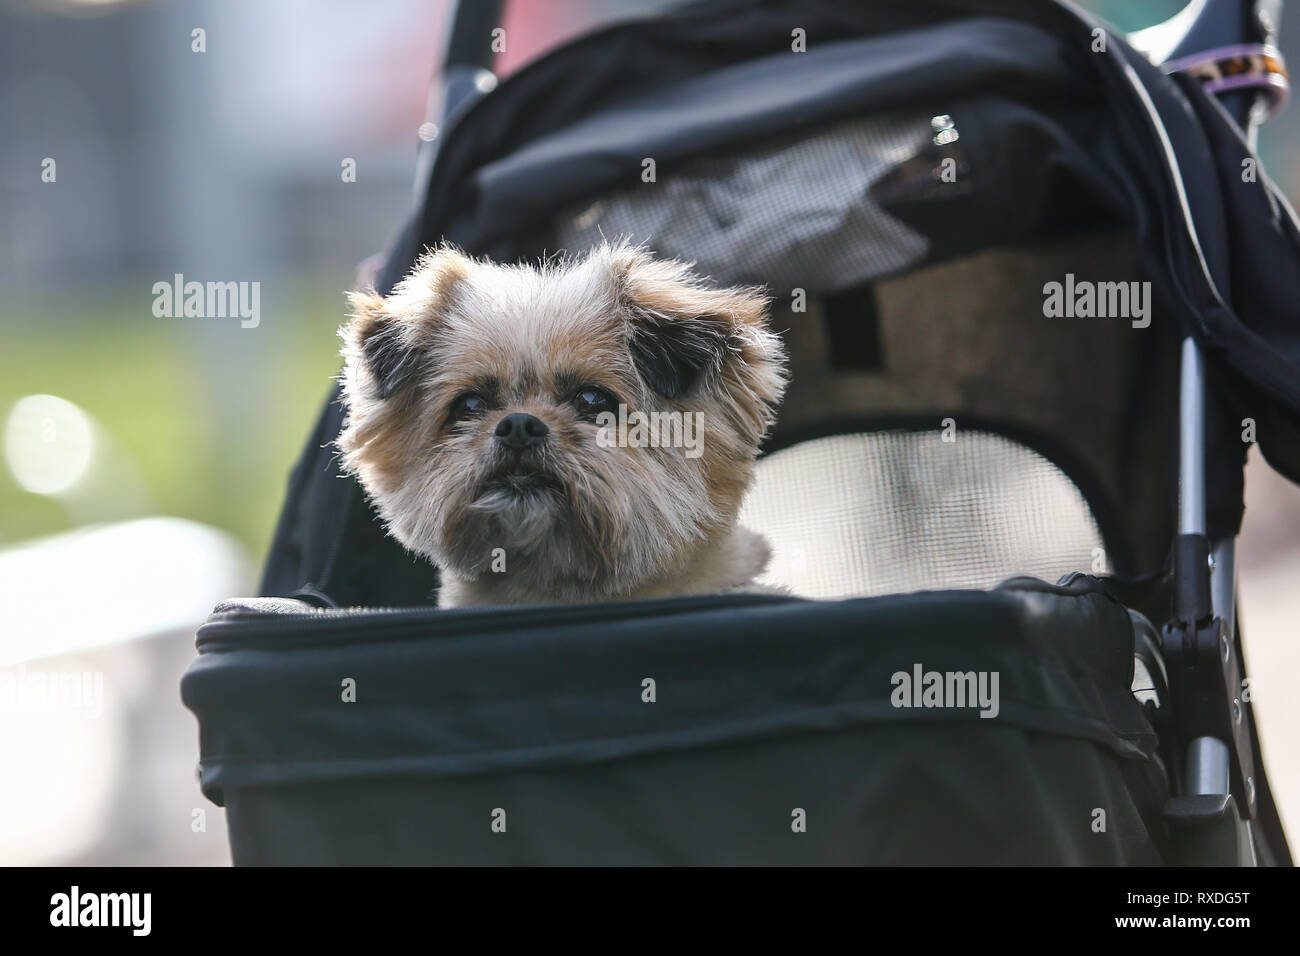 Birmingham, UK. 9th March, 2019. Dogs arrive with their owners on day three of Crufts, the world's largest dog show, at the NEC Birmingham. Minnie the Shipom arrives in her own pram. Peter Lopeman/Alamy Live News Stock Photo